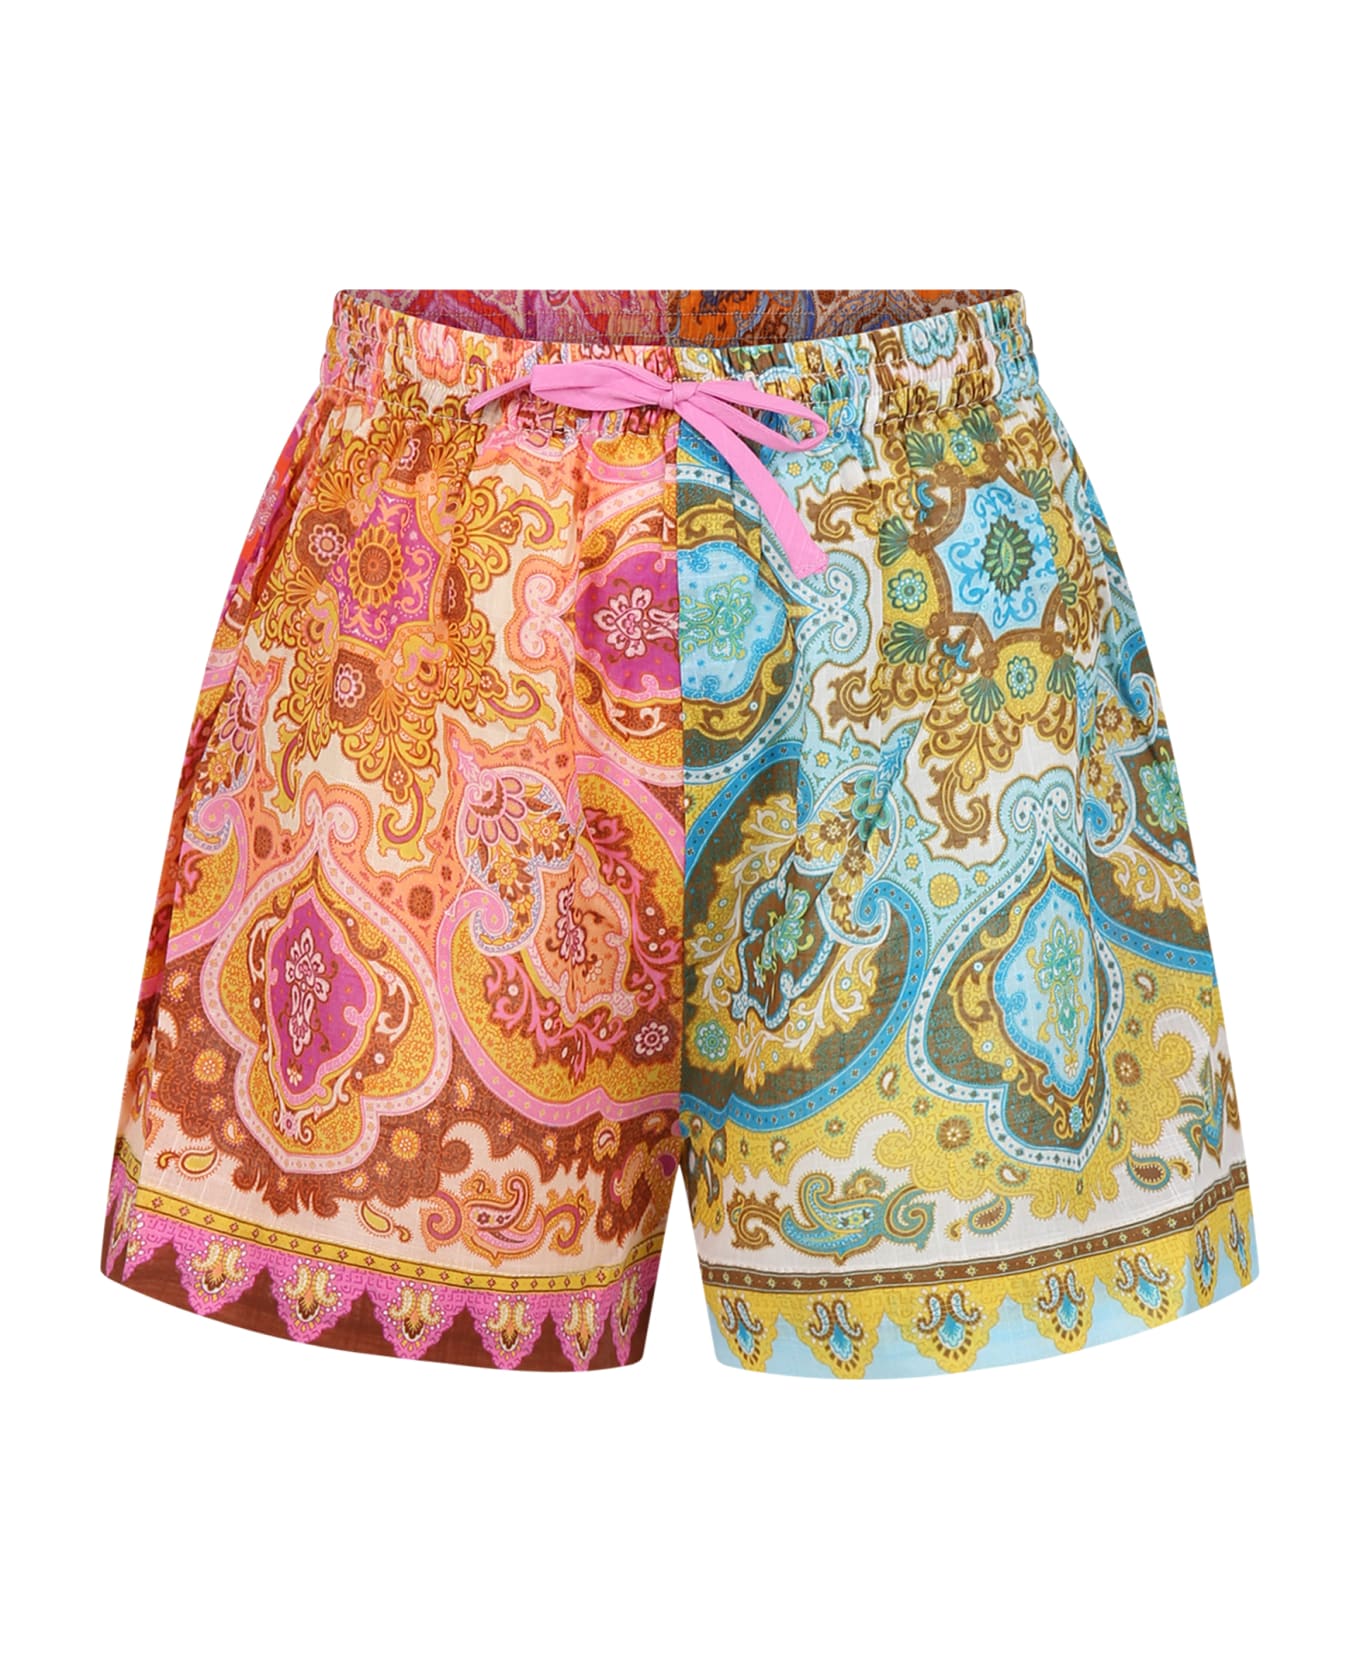 Zimmermann Multicolor Shorts For Girl With Print - Multicolor